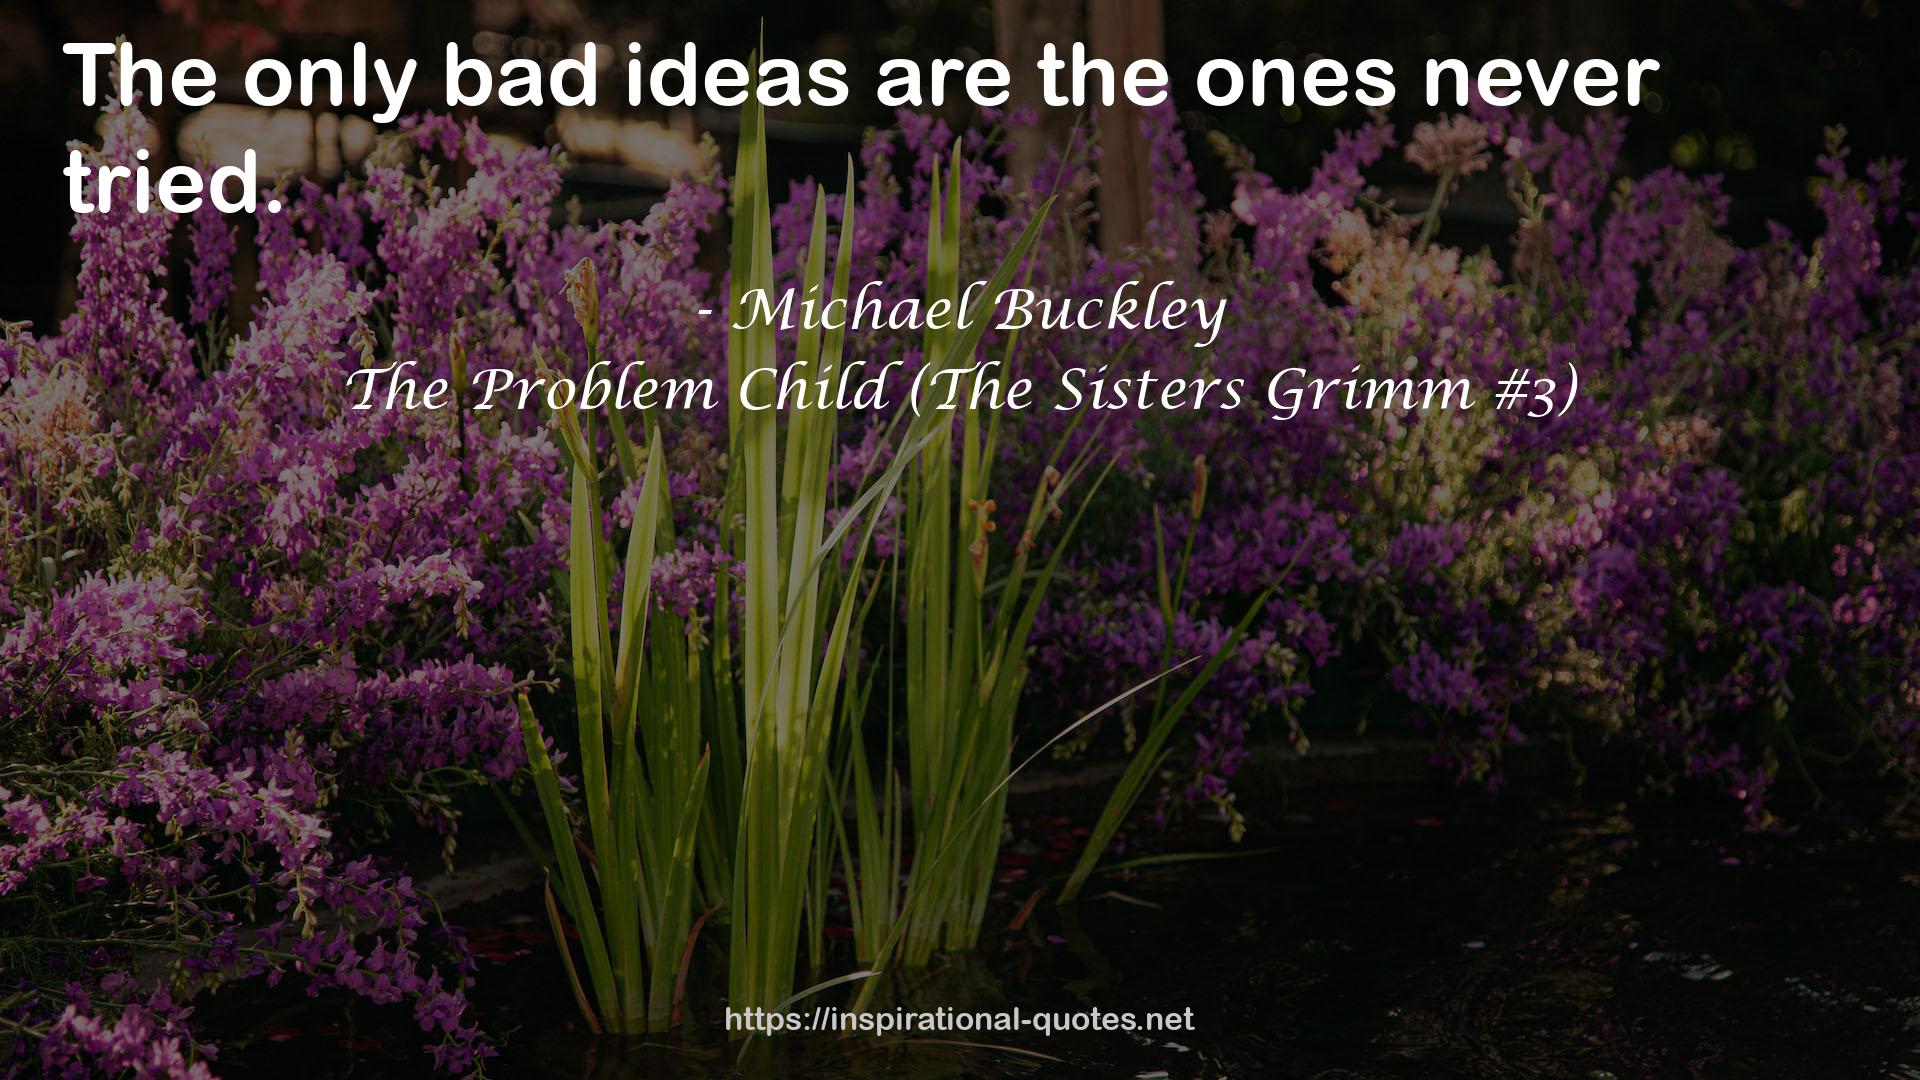 The Problem Child (The Sisters Grimm #3) QUOTES